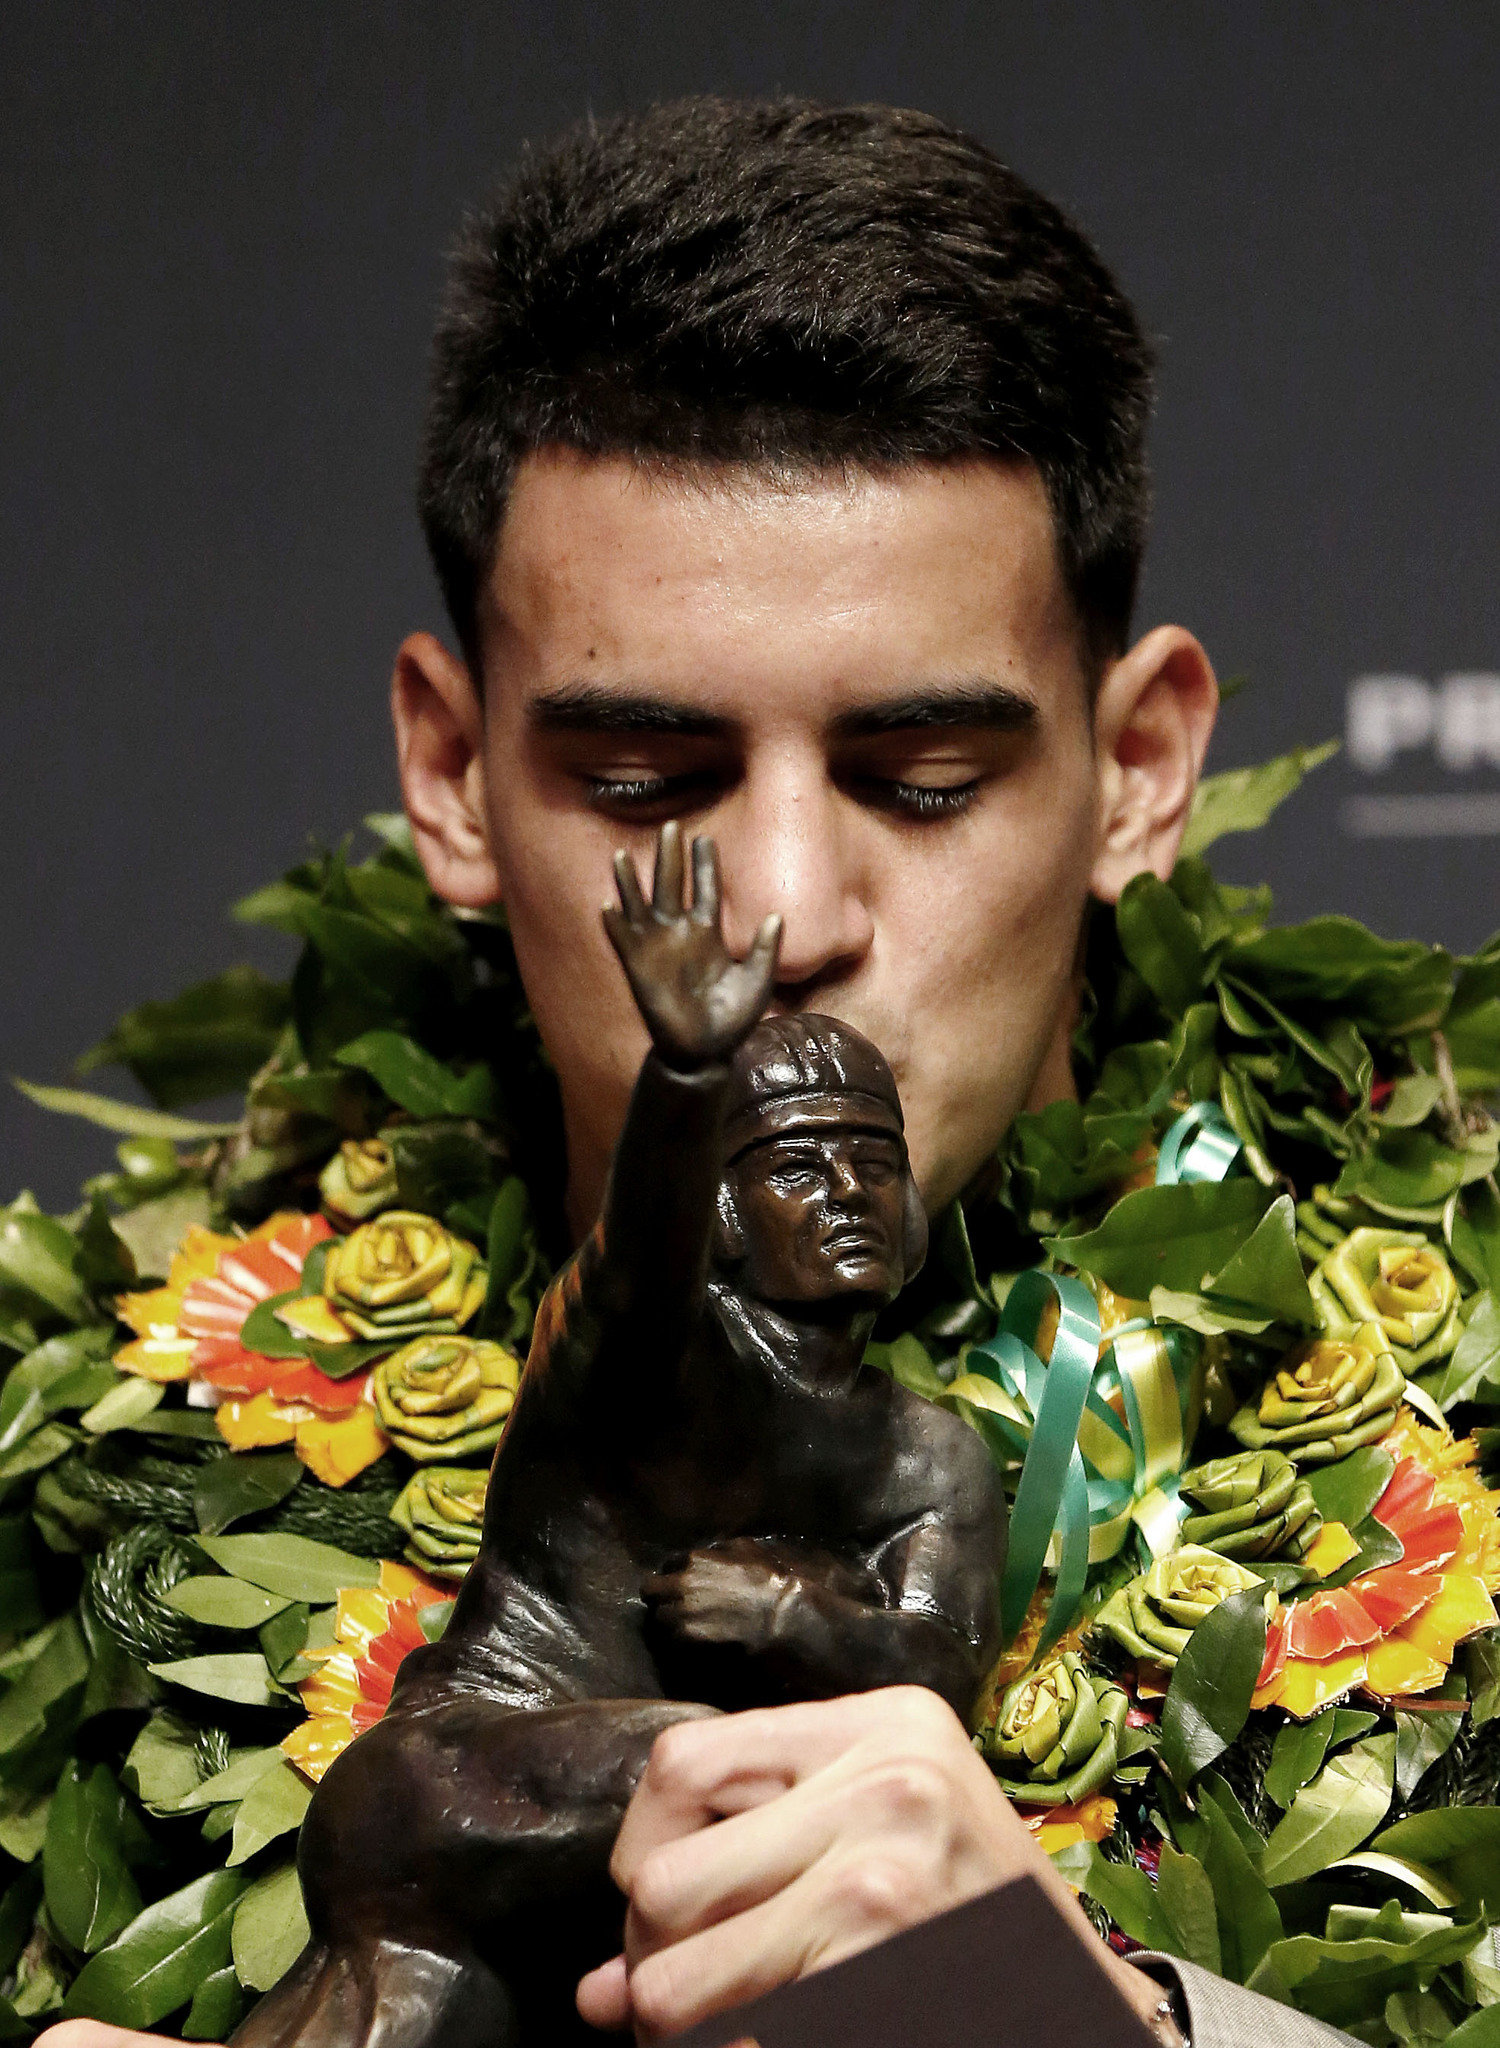 National title pick: Why Marcus Mariota will lead Oregon to crown.